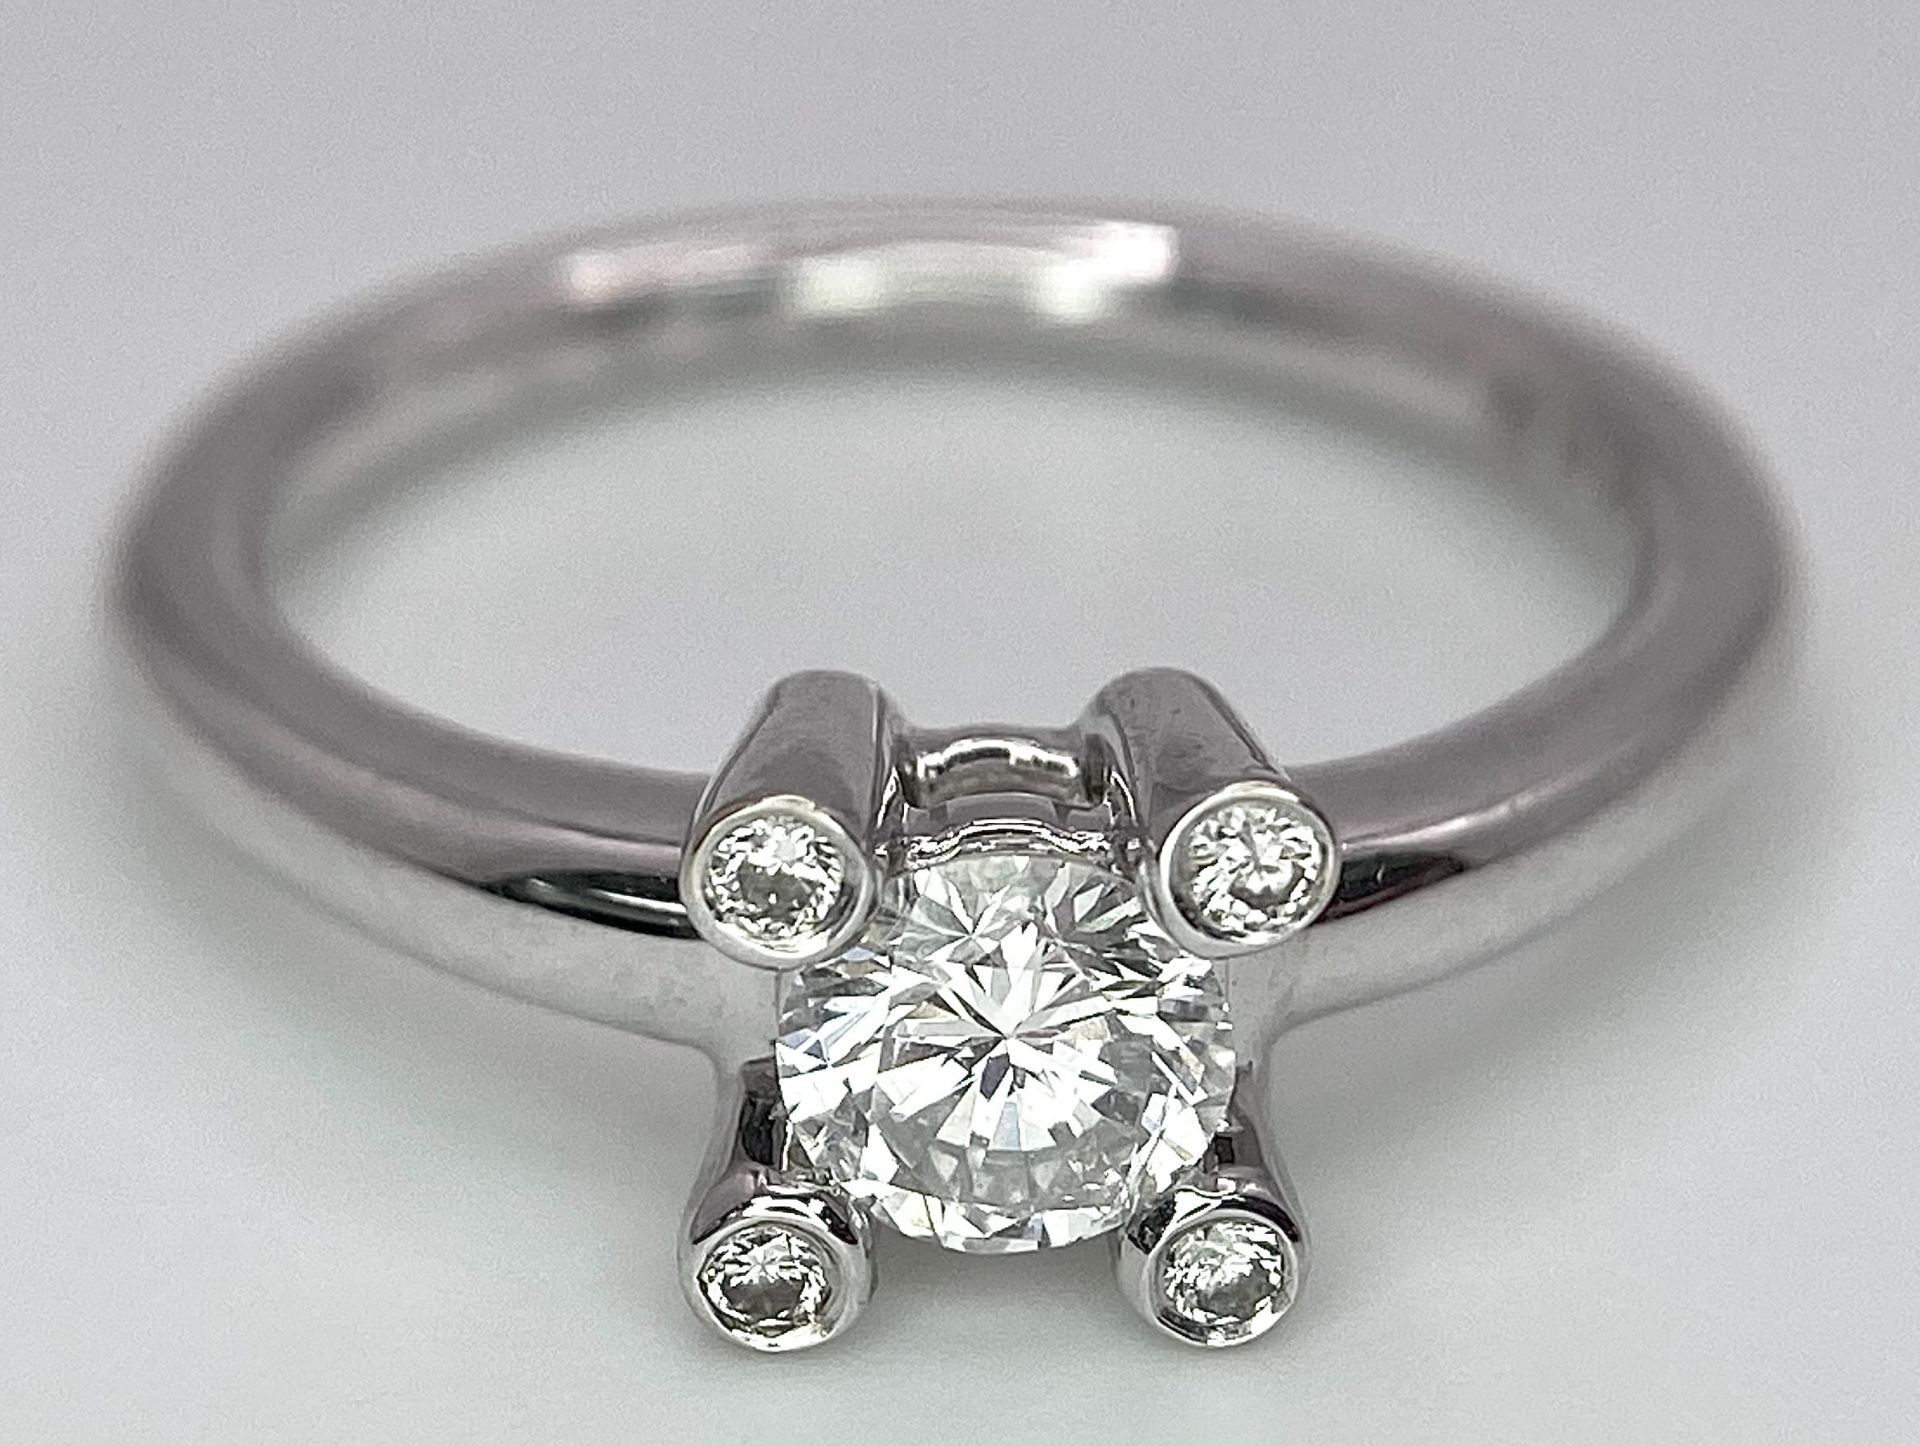 AN 18K WHITE GOLD DIAMOND SOLITAIRE RING WITH FOUR DIAMOND TURRETS - 0.50CT 4.6G. SIZE M 1/2. - Image 4 of 10